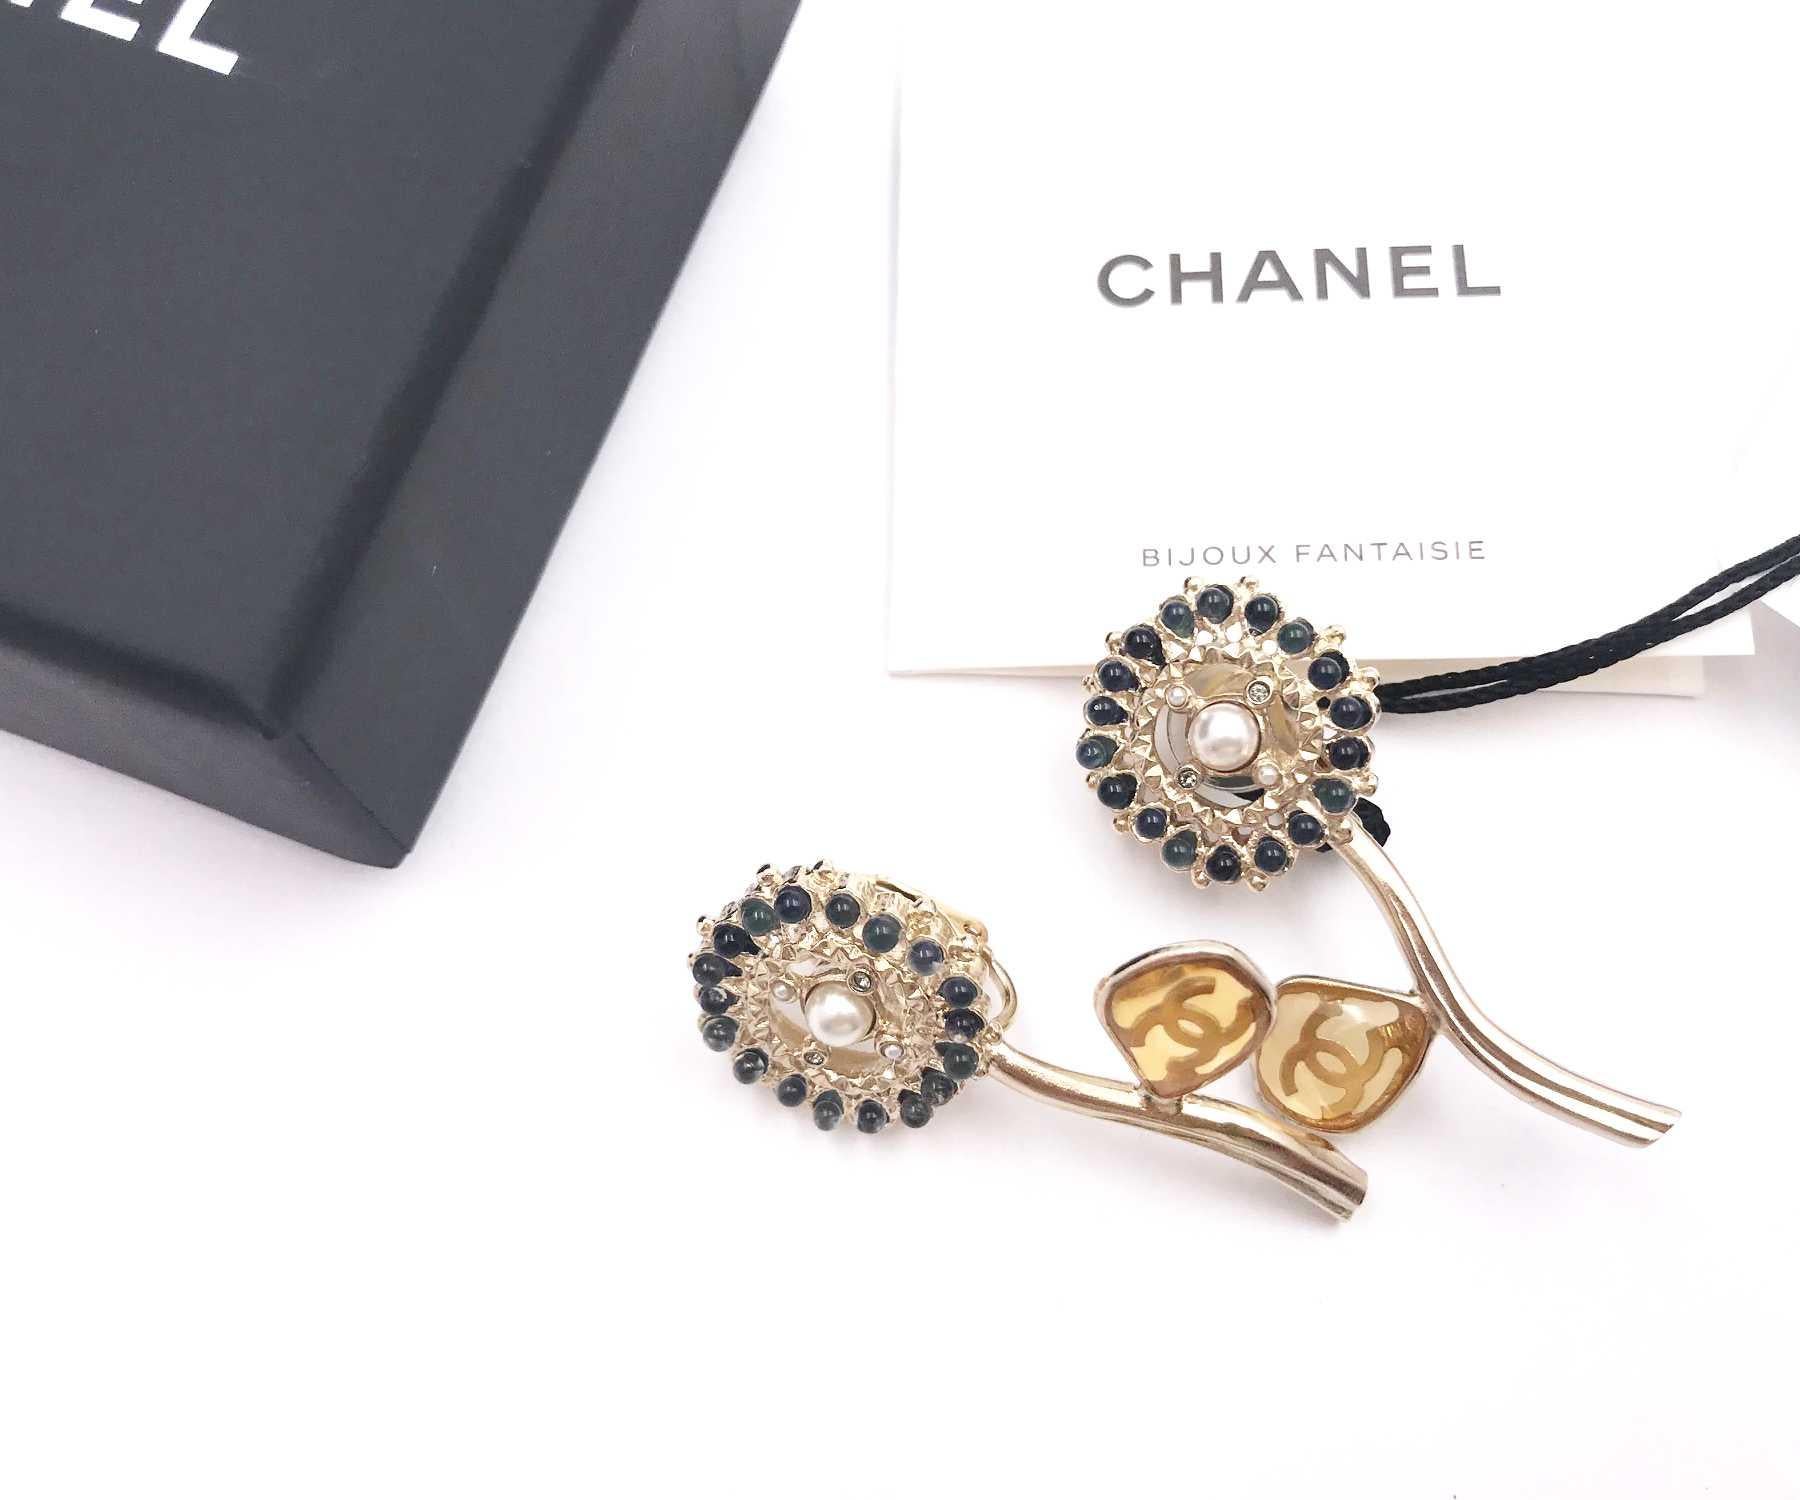 Chanel Brand New Gold CC Flower Blue Stone Stem Clip on Earrings

* Marked 18
* Made in France
* Comes with original box, pouch, tag, booklet and ribbon
* Brand New

- Approximately 1.6